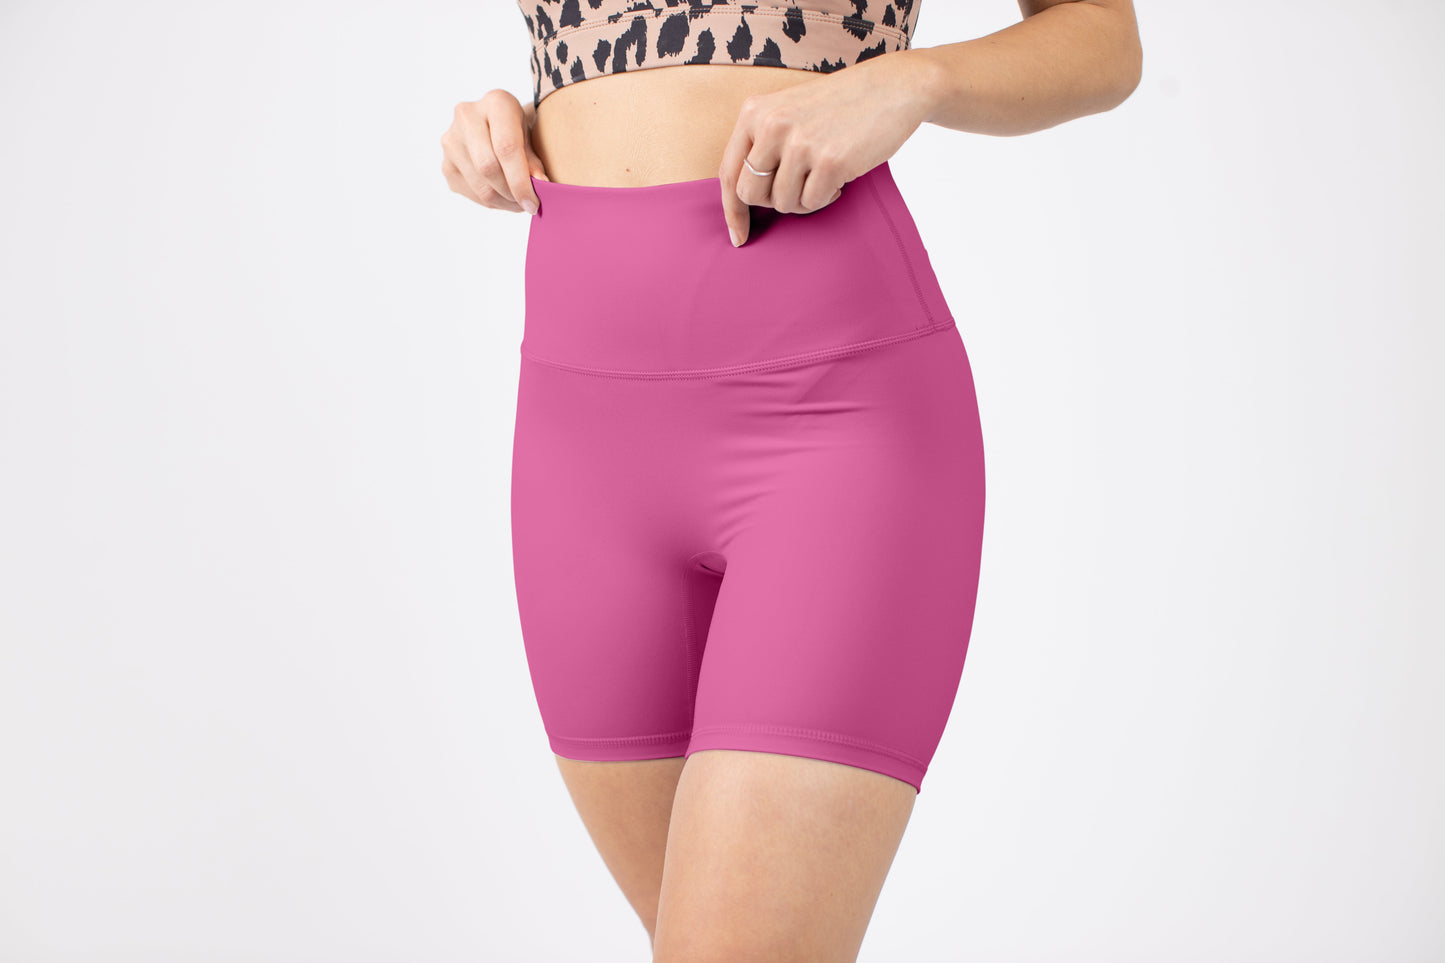 Neon Pink Biker Shorts - Buttery soft collection 